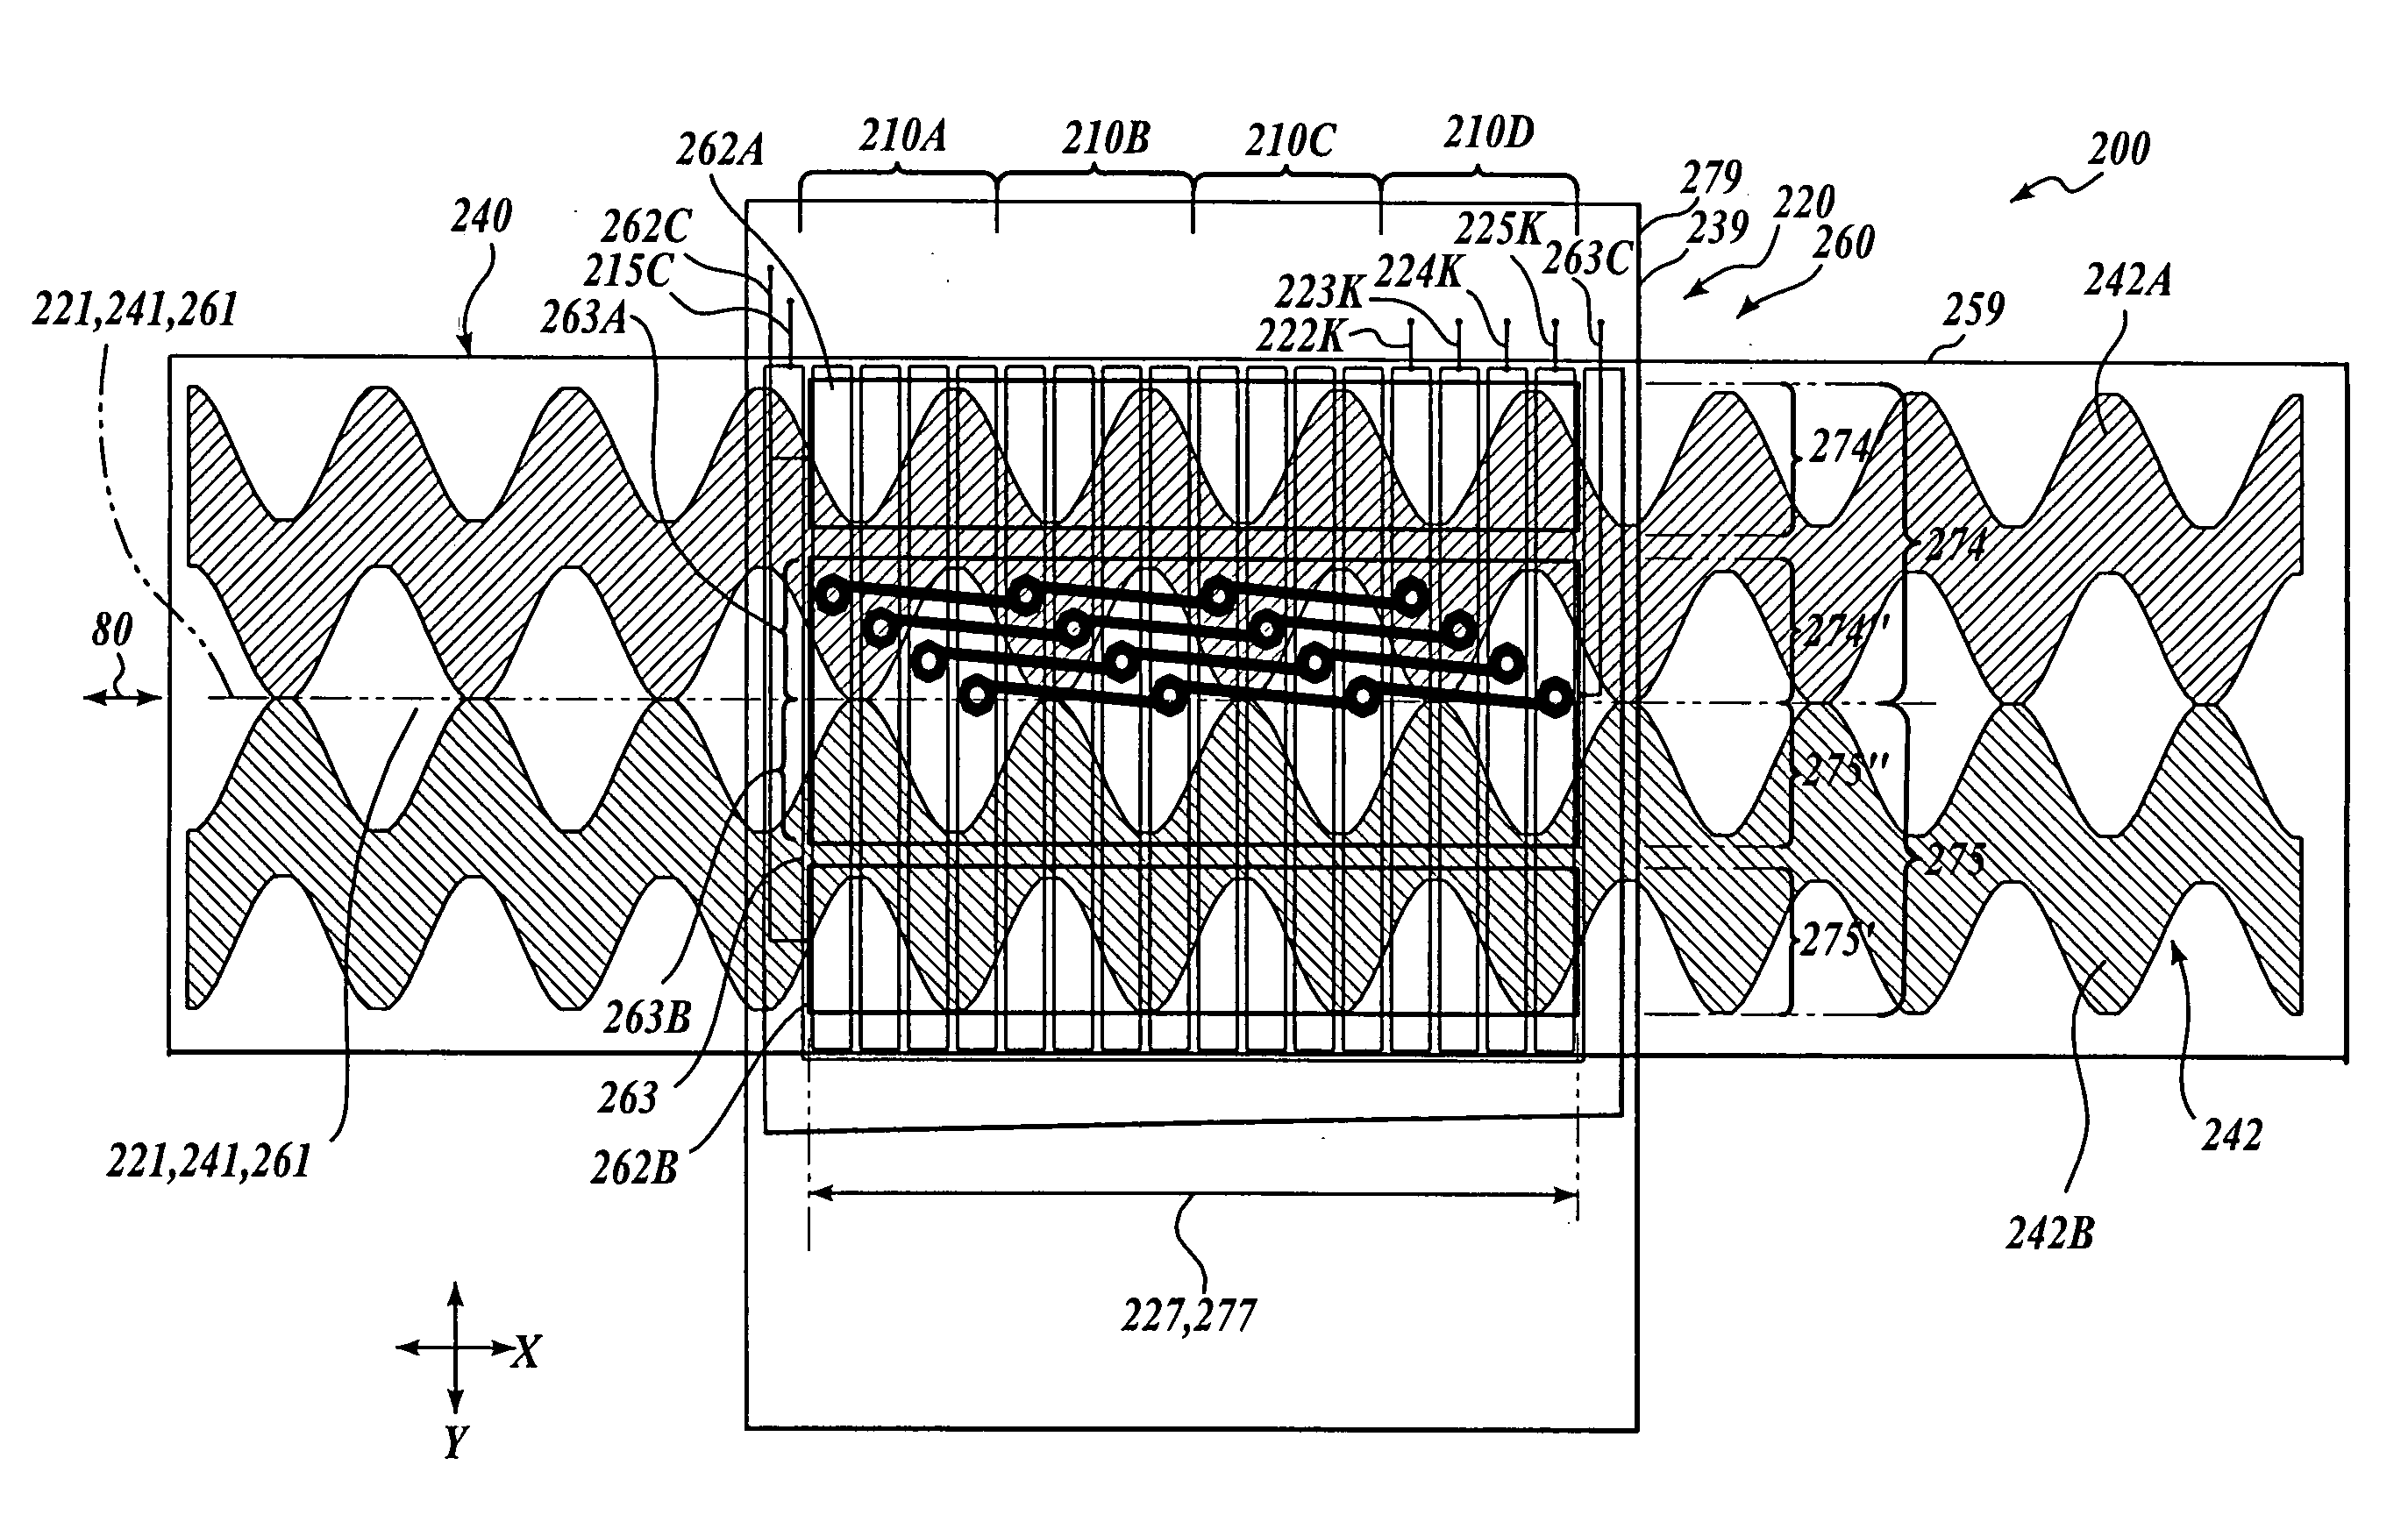 Signal-balanced shield electrode configuration for use in capacitive displacement sensing systems and methods